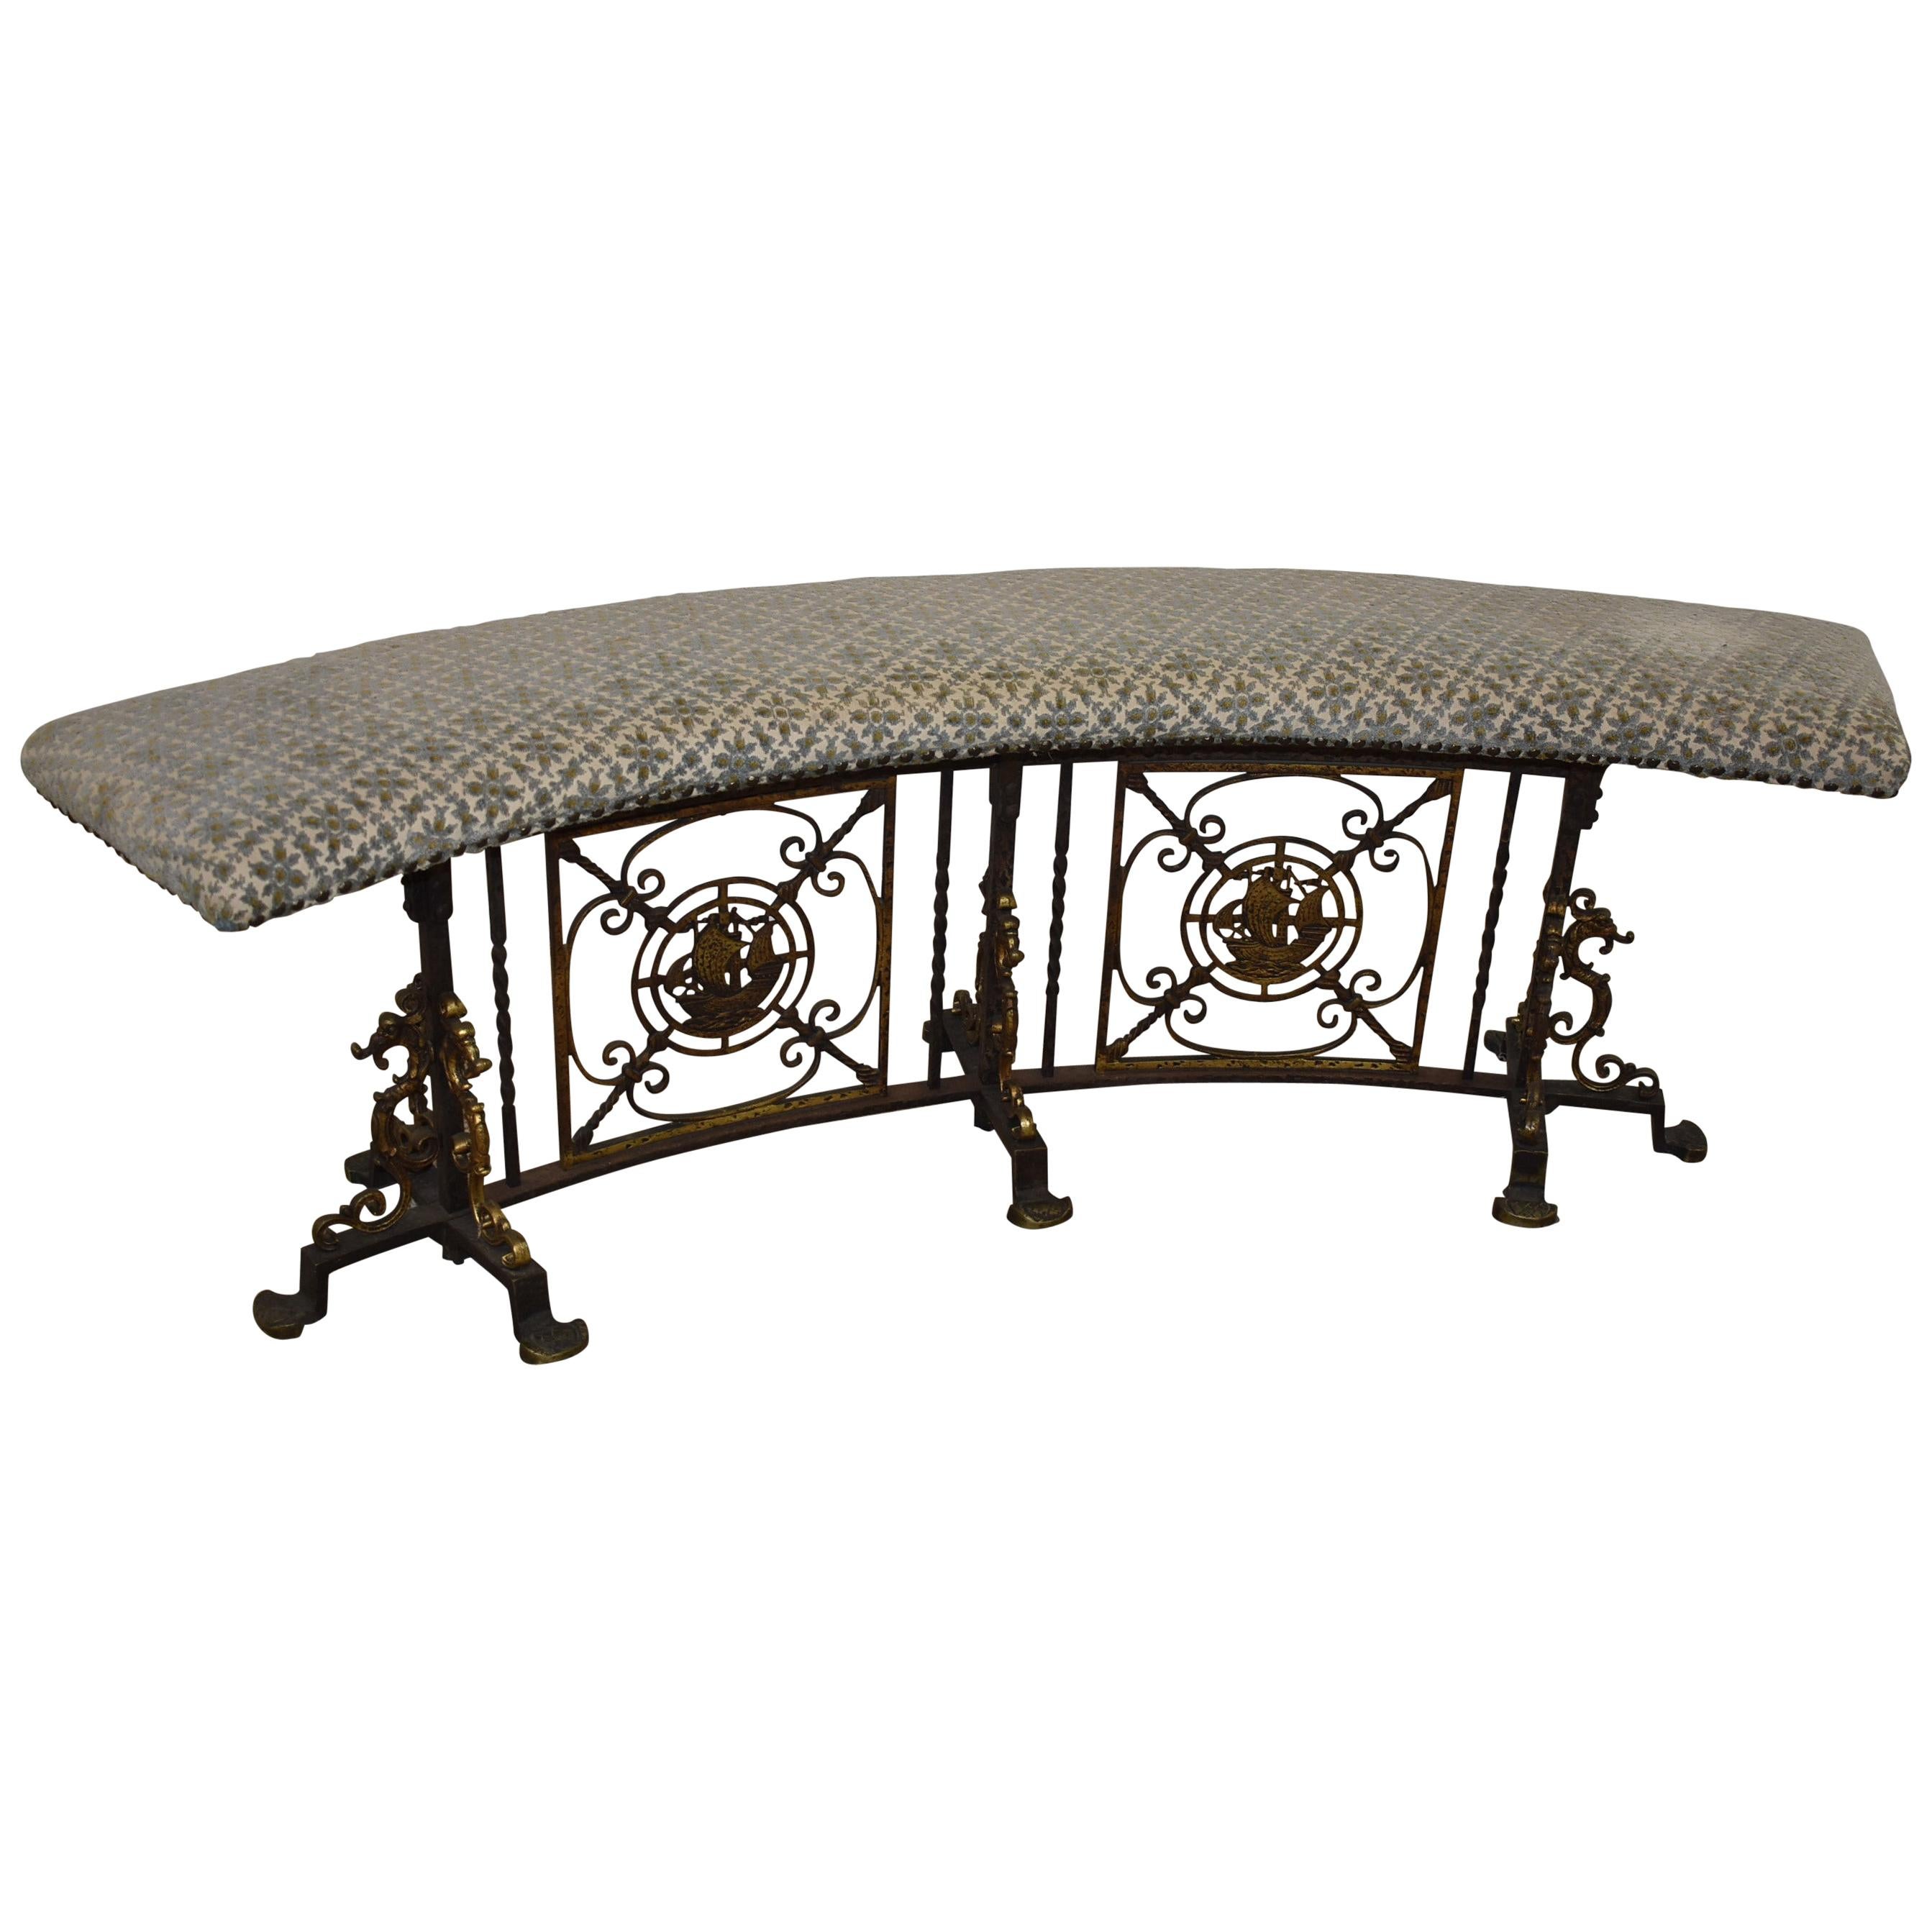 Curved Iron Upholstered Bench Attributed to Oscar Bach Ship & Seahorse Details